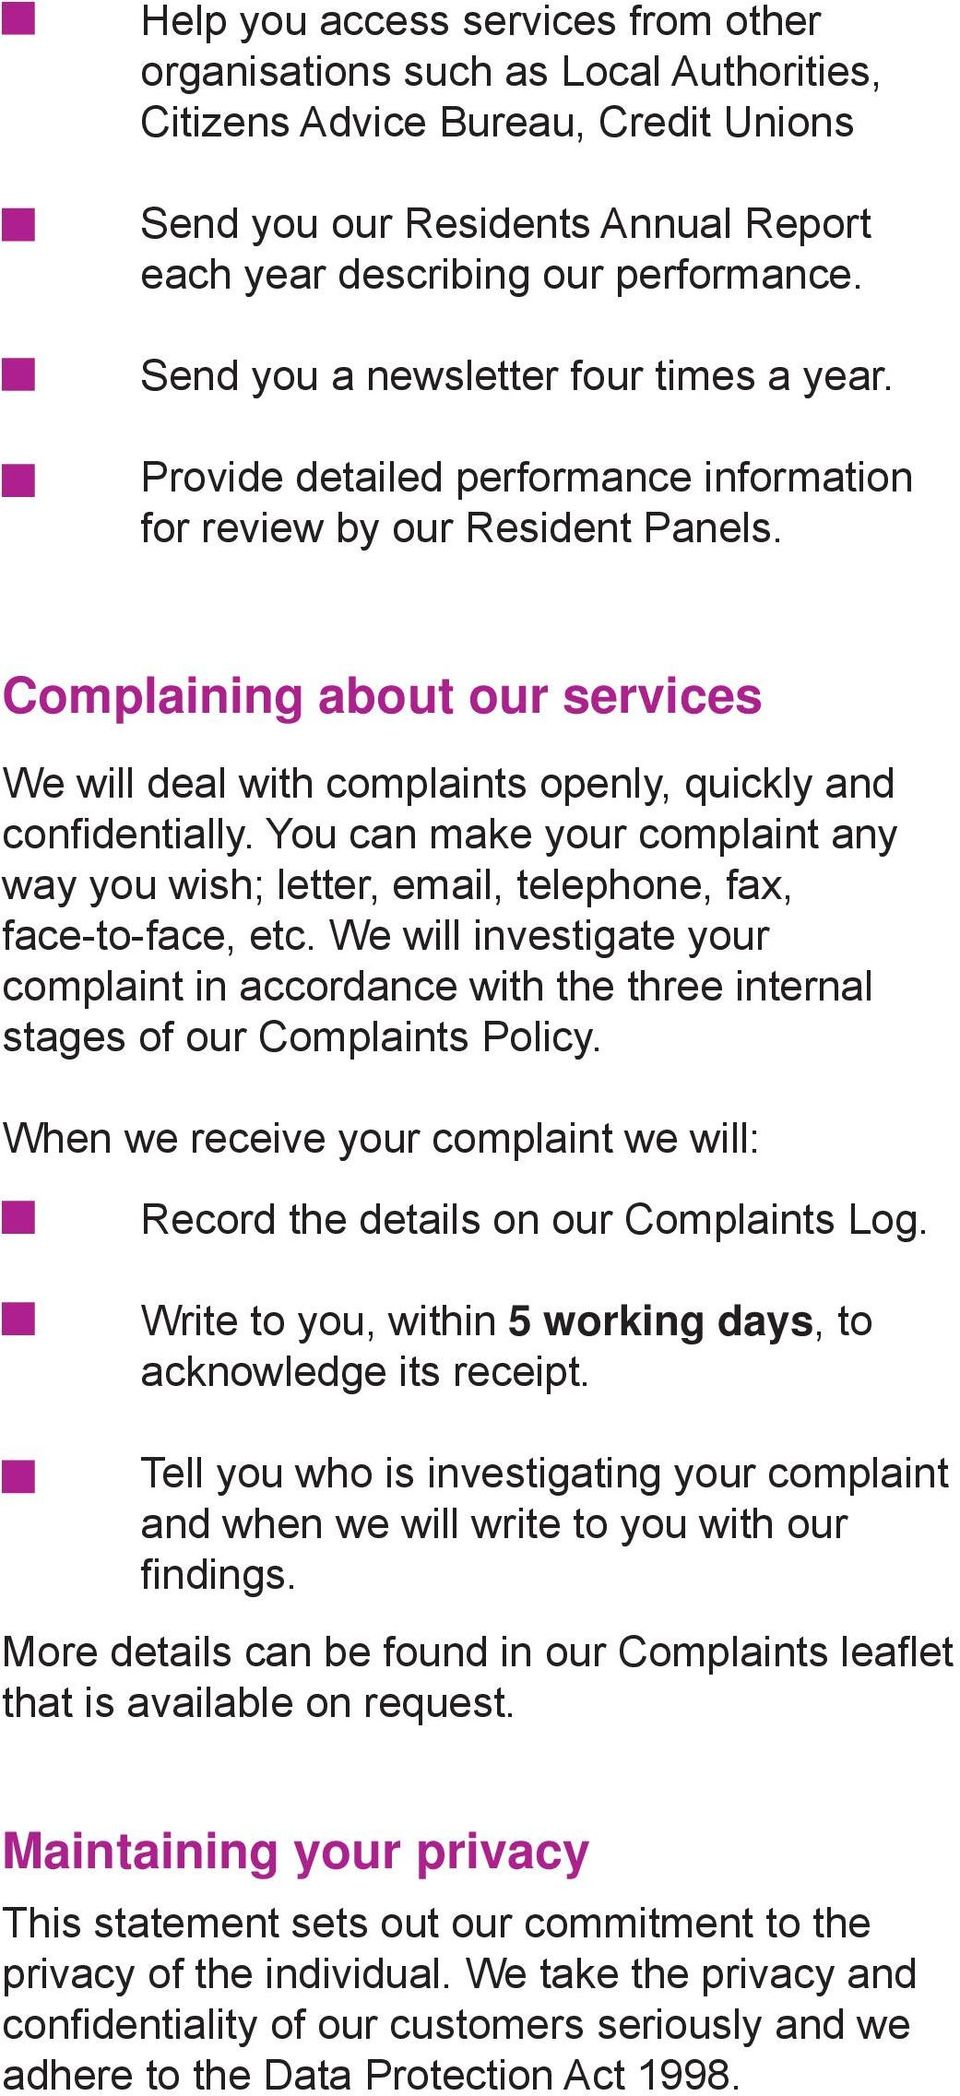 Complaining about our services We will deal with complaints openly, quickly and confi dentially. You can make your complaint any way you wish; letter, email, telephone, fax, face-to-face, etc.